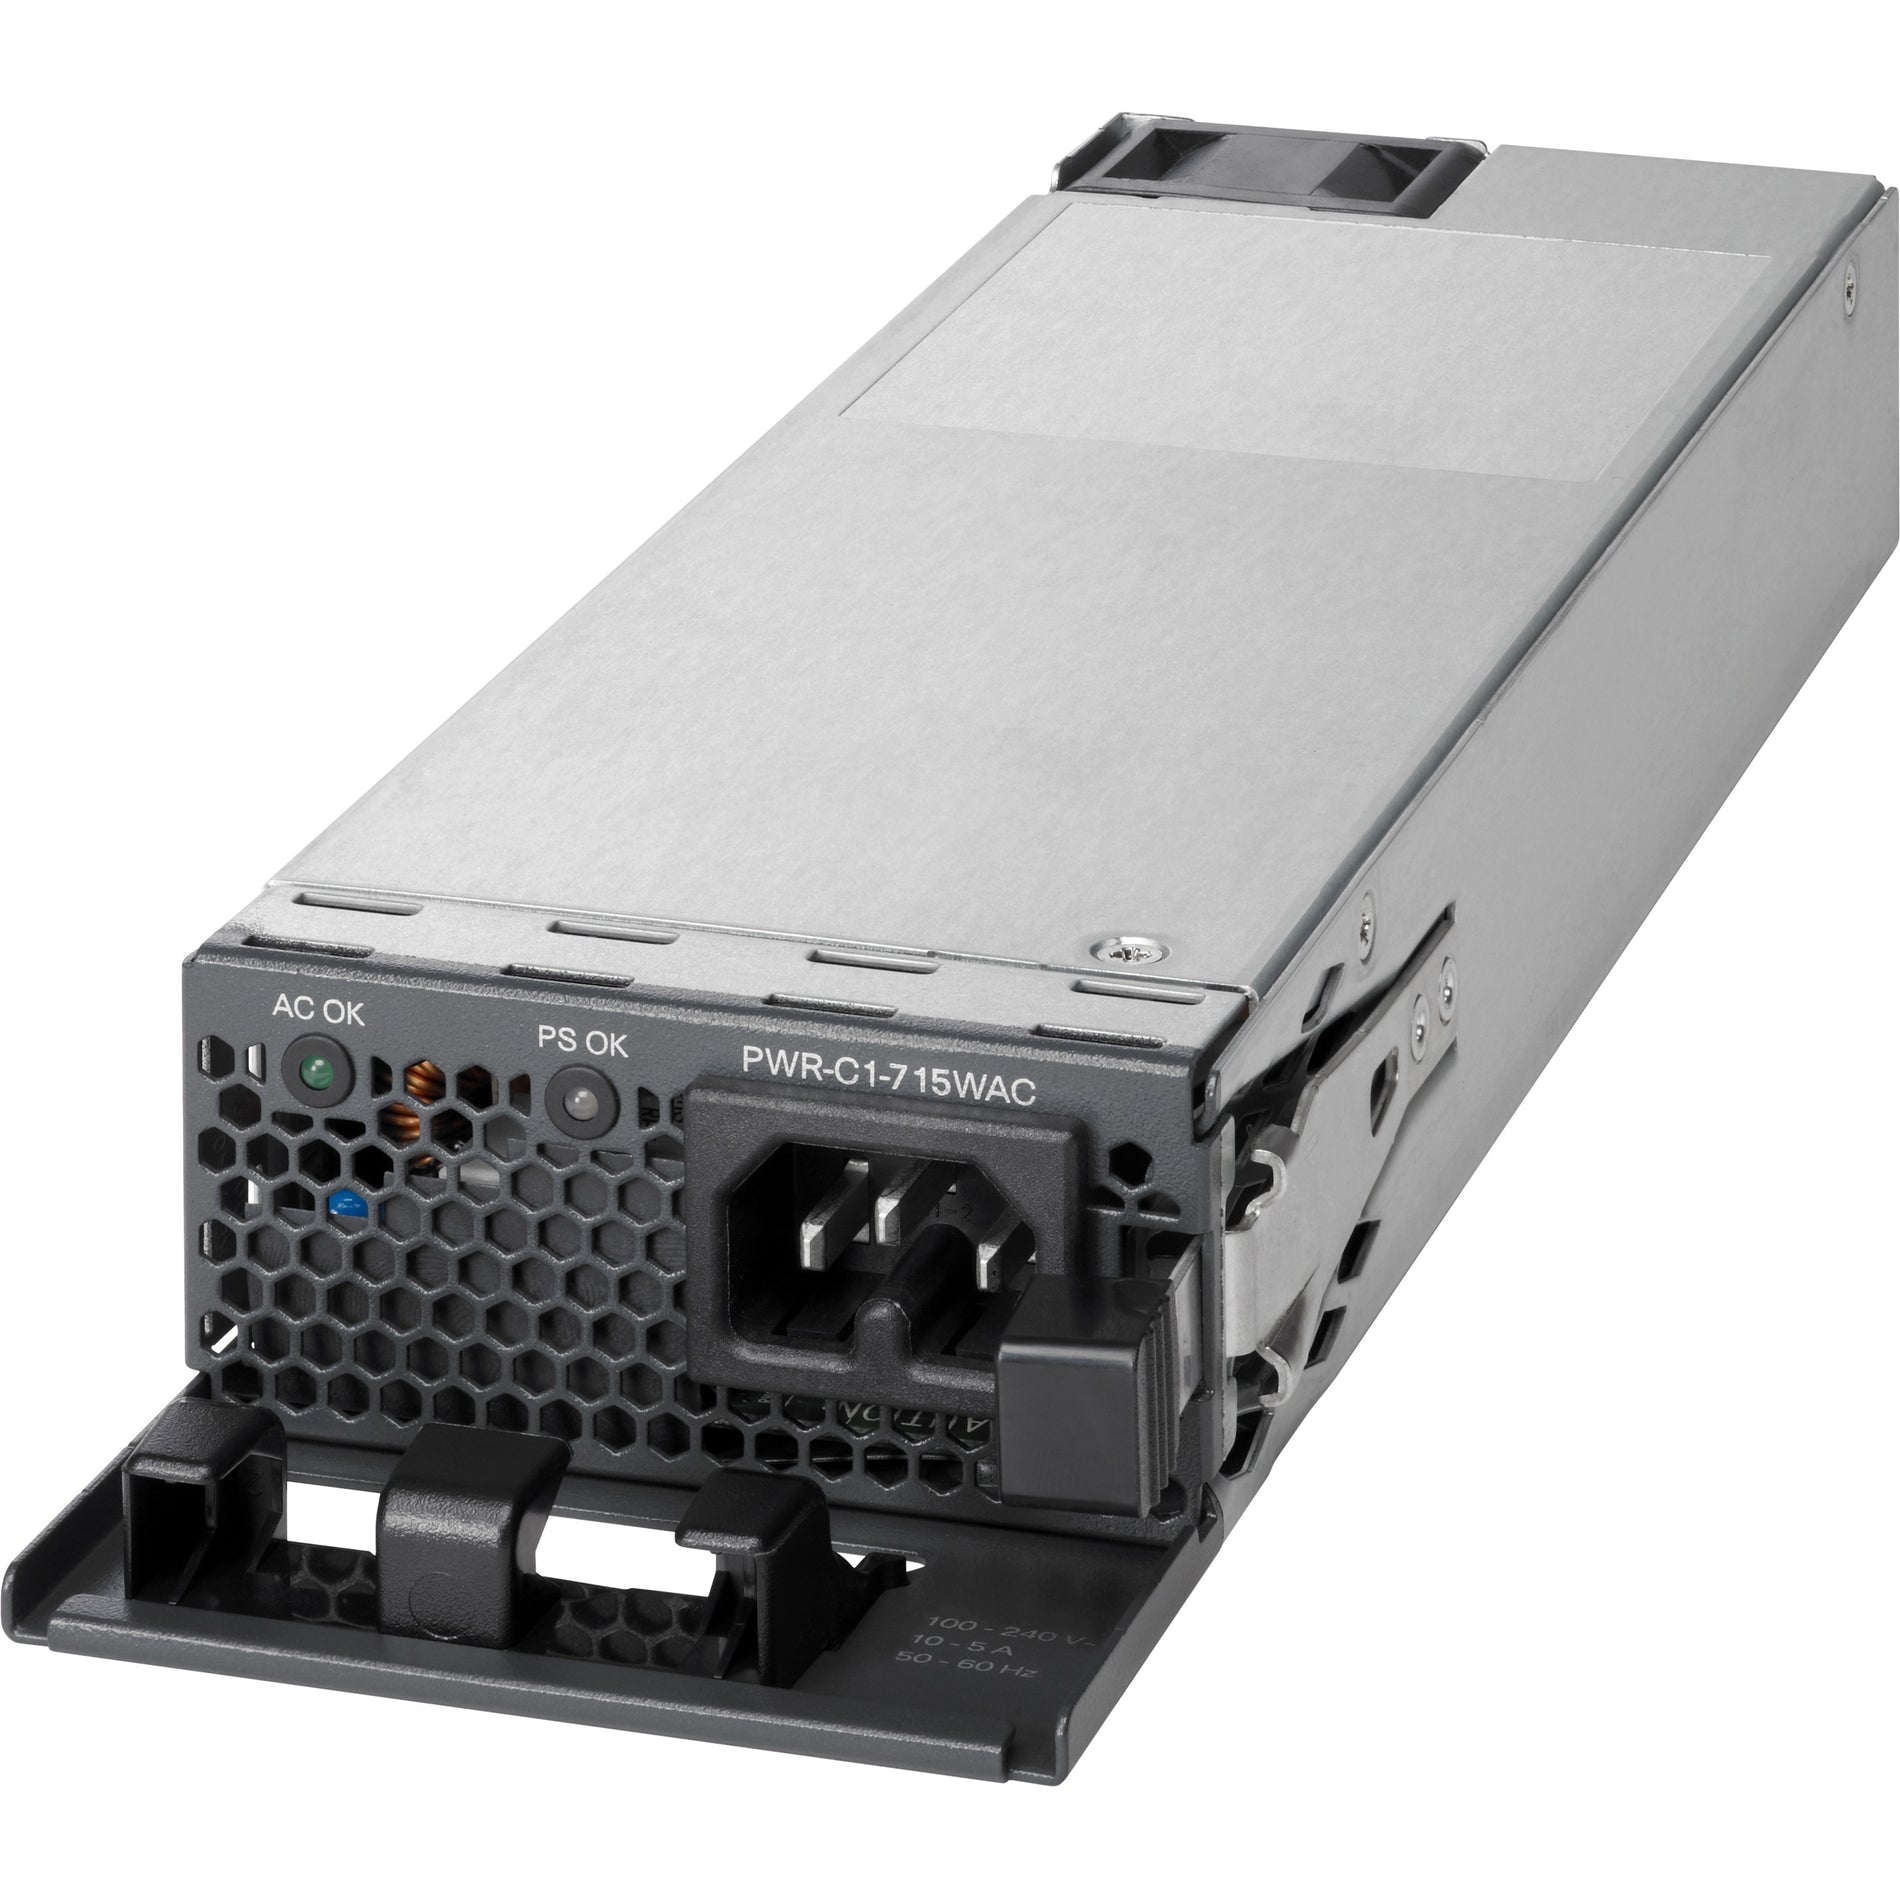 Cisco PWR-C1-715WAC 715W AC Power Supply Spare - Reliable Power for Cisco Catalyst 3850 Series Switches